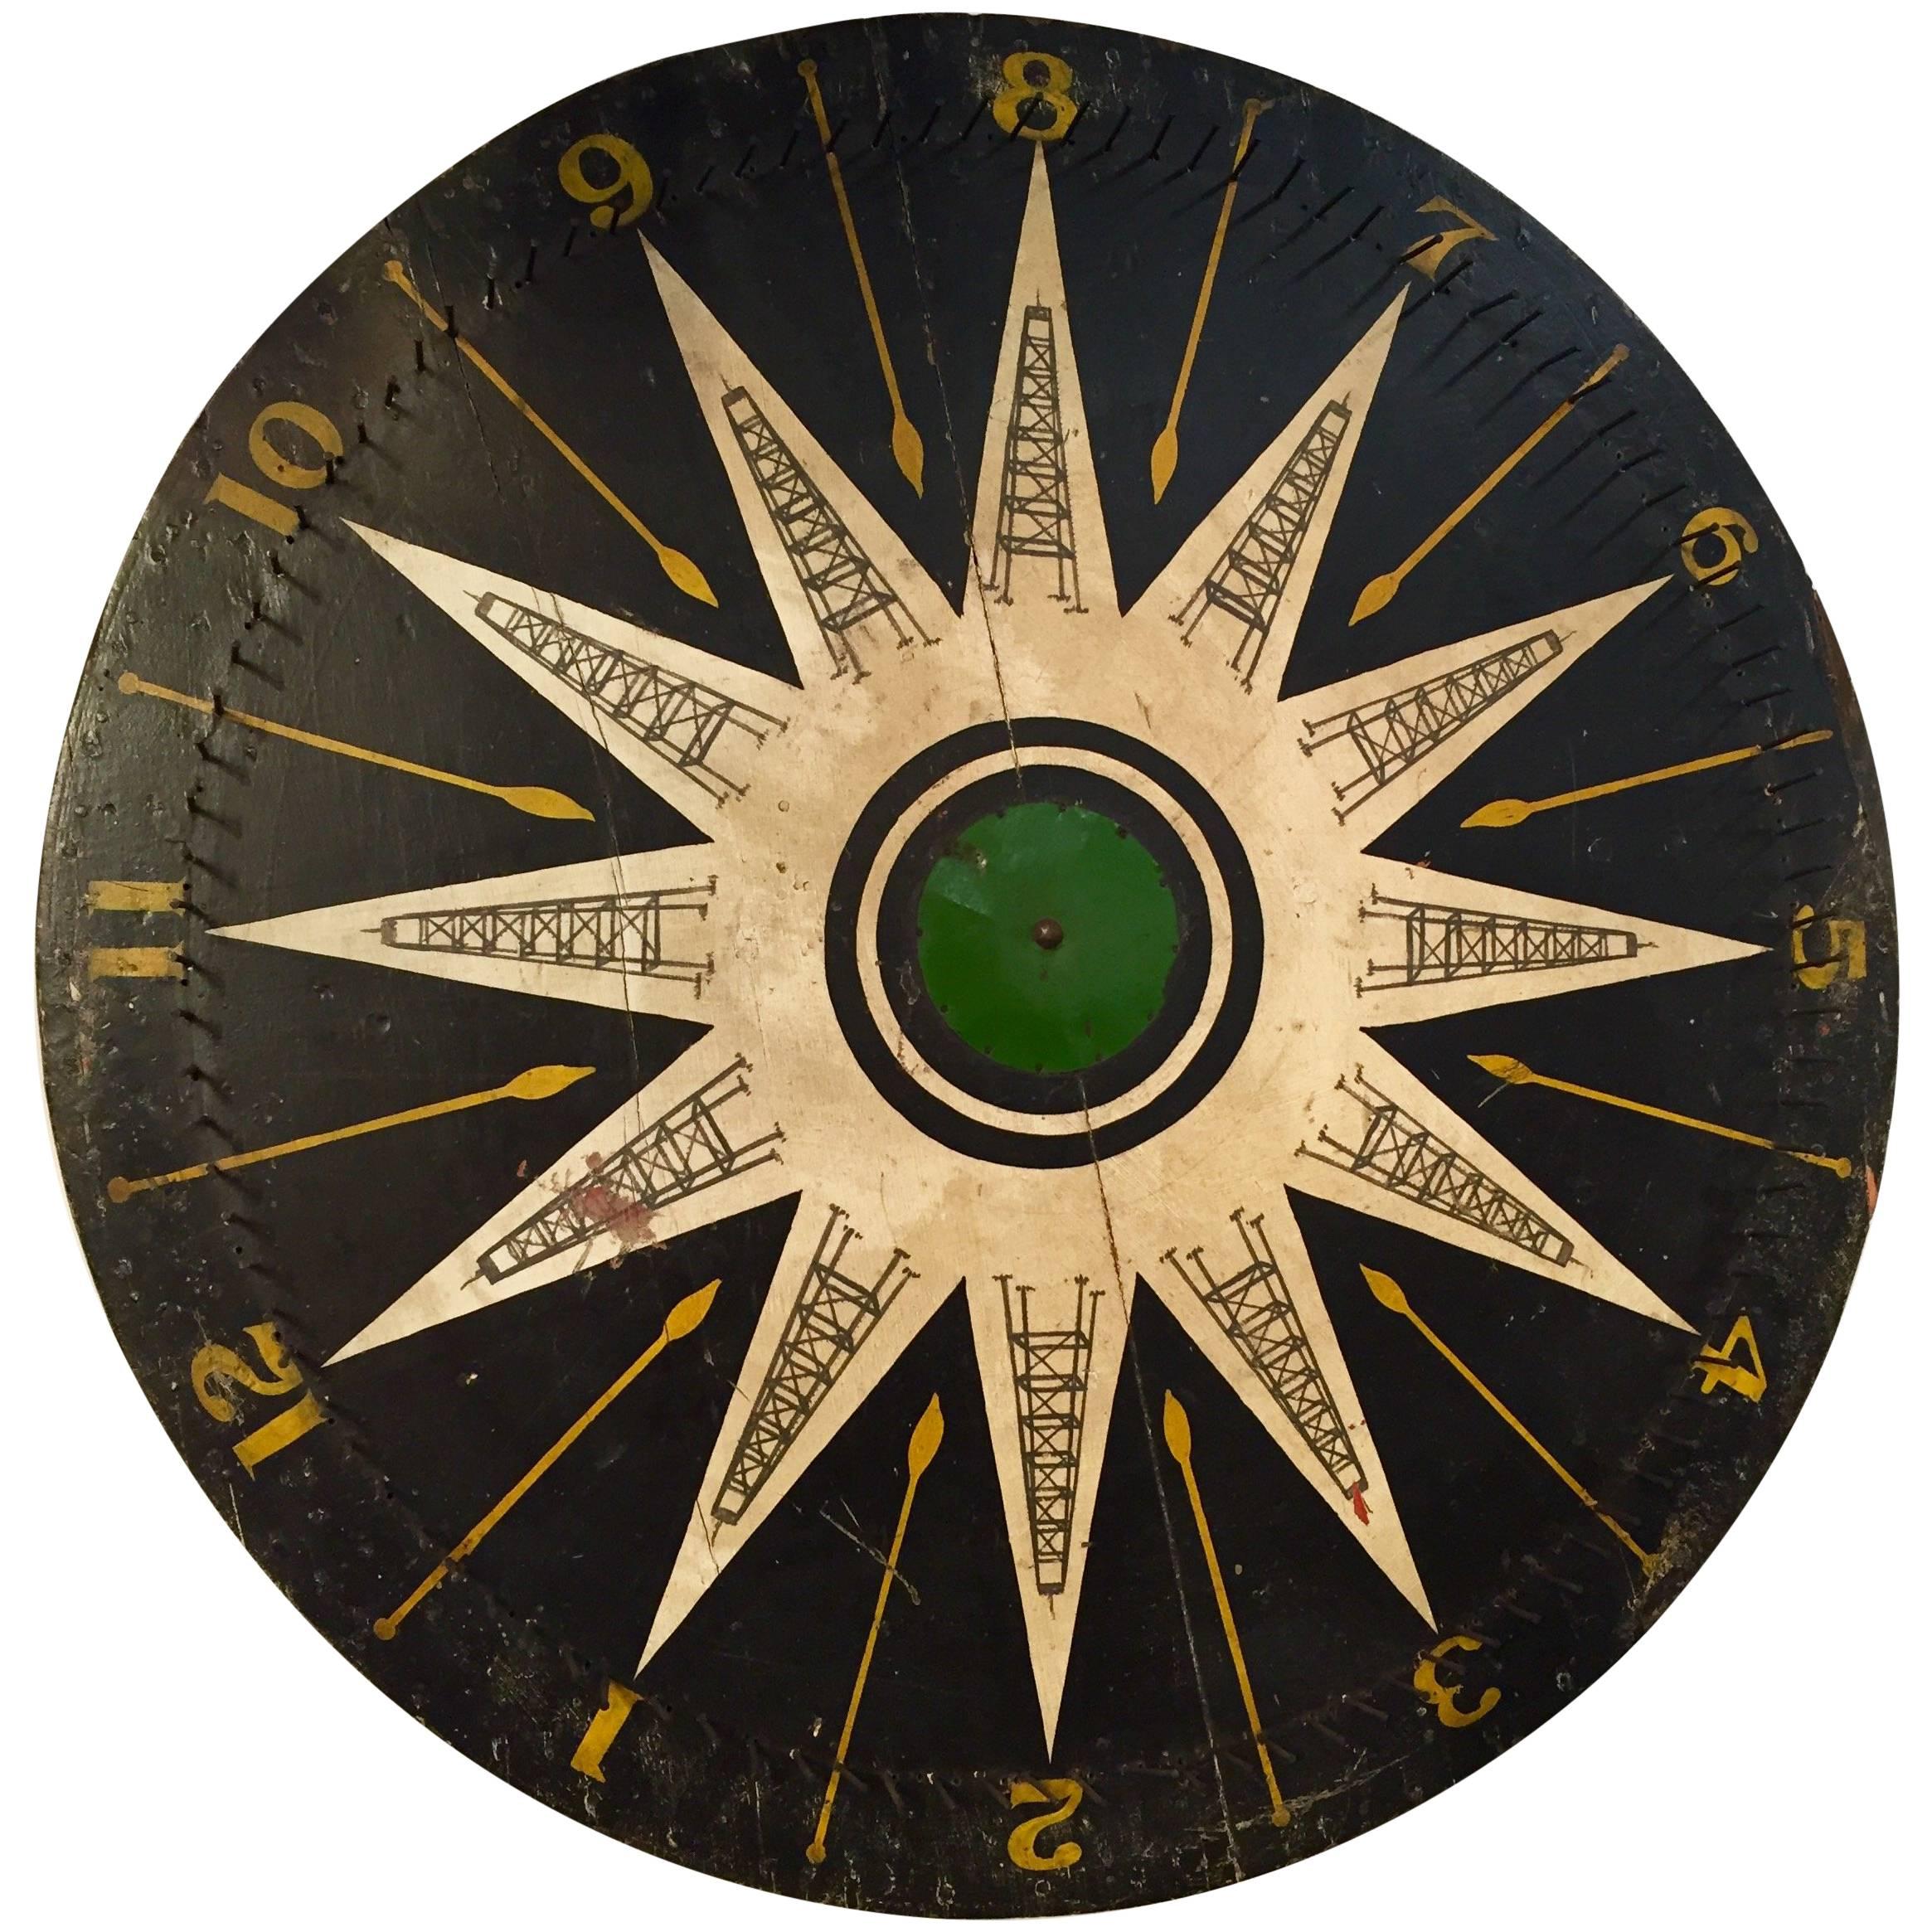 Painted 1920s Graphic Game Wheel with Oil Derrick Illustration